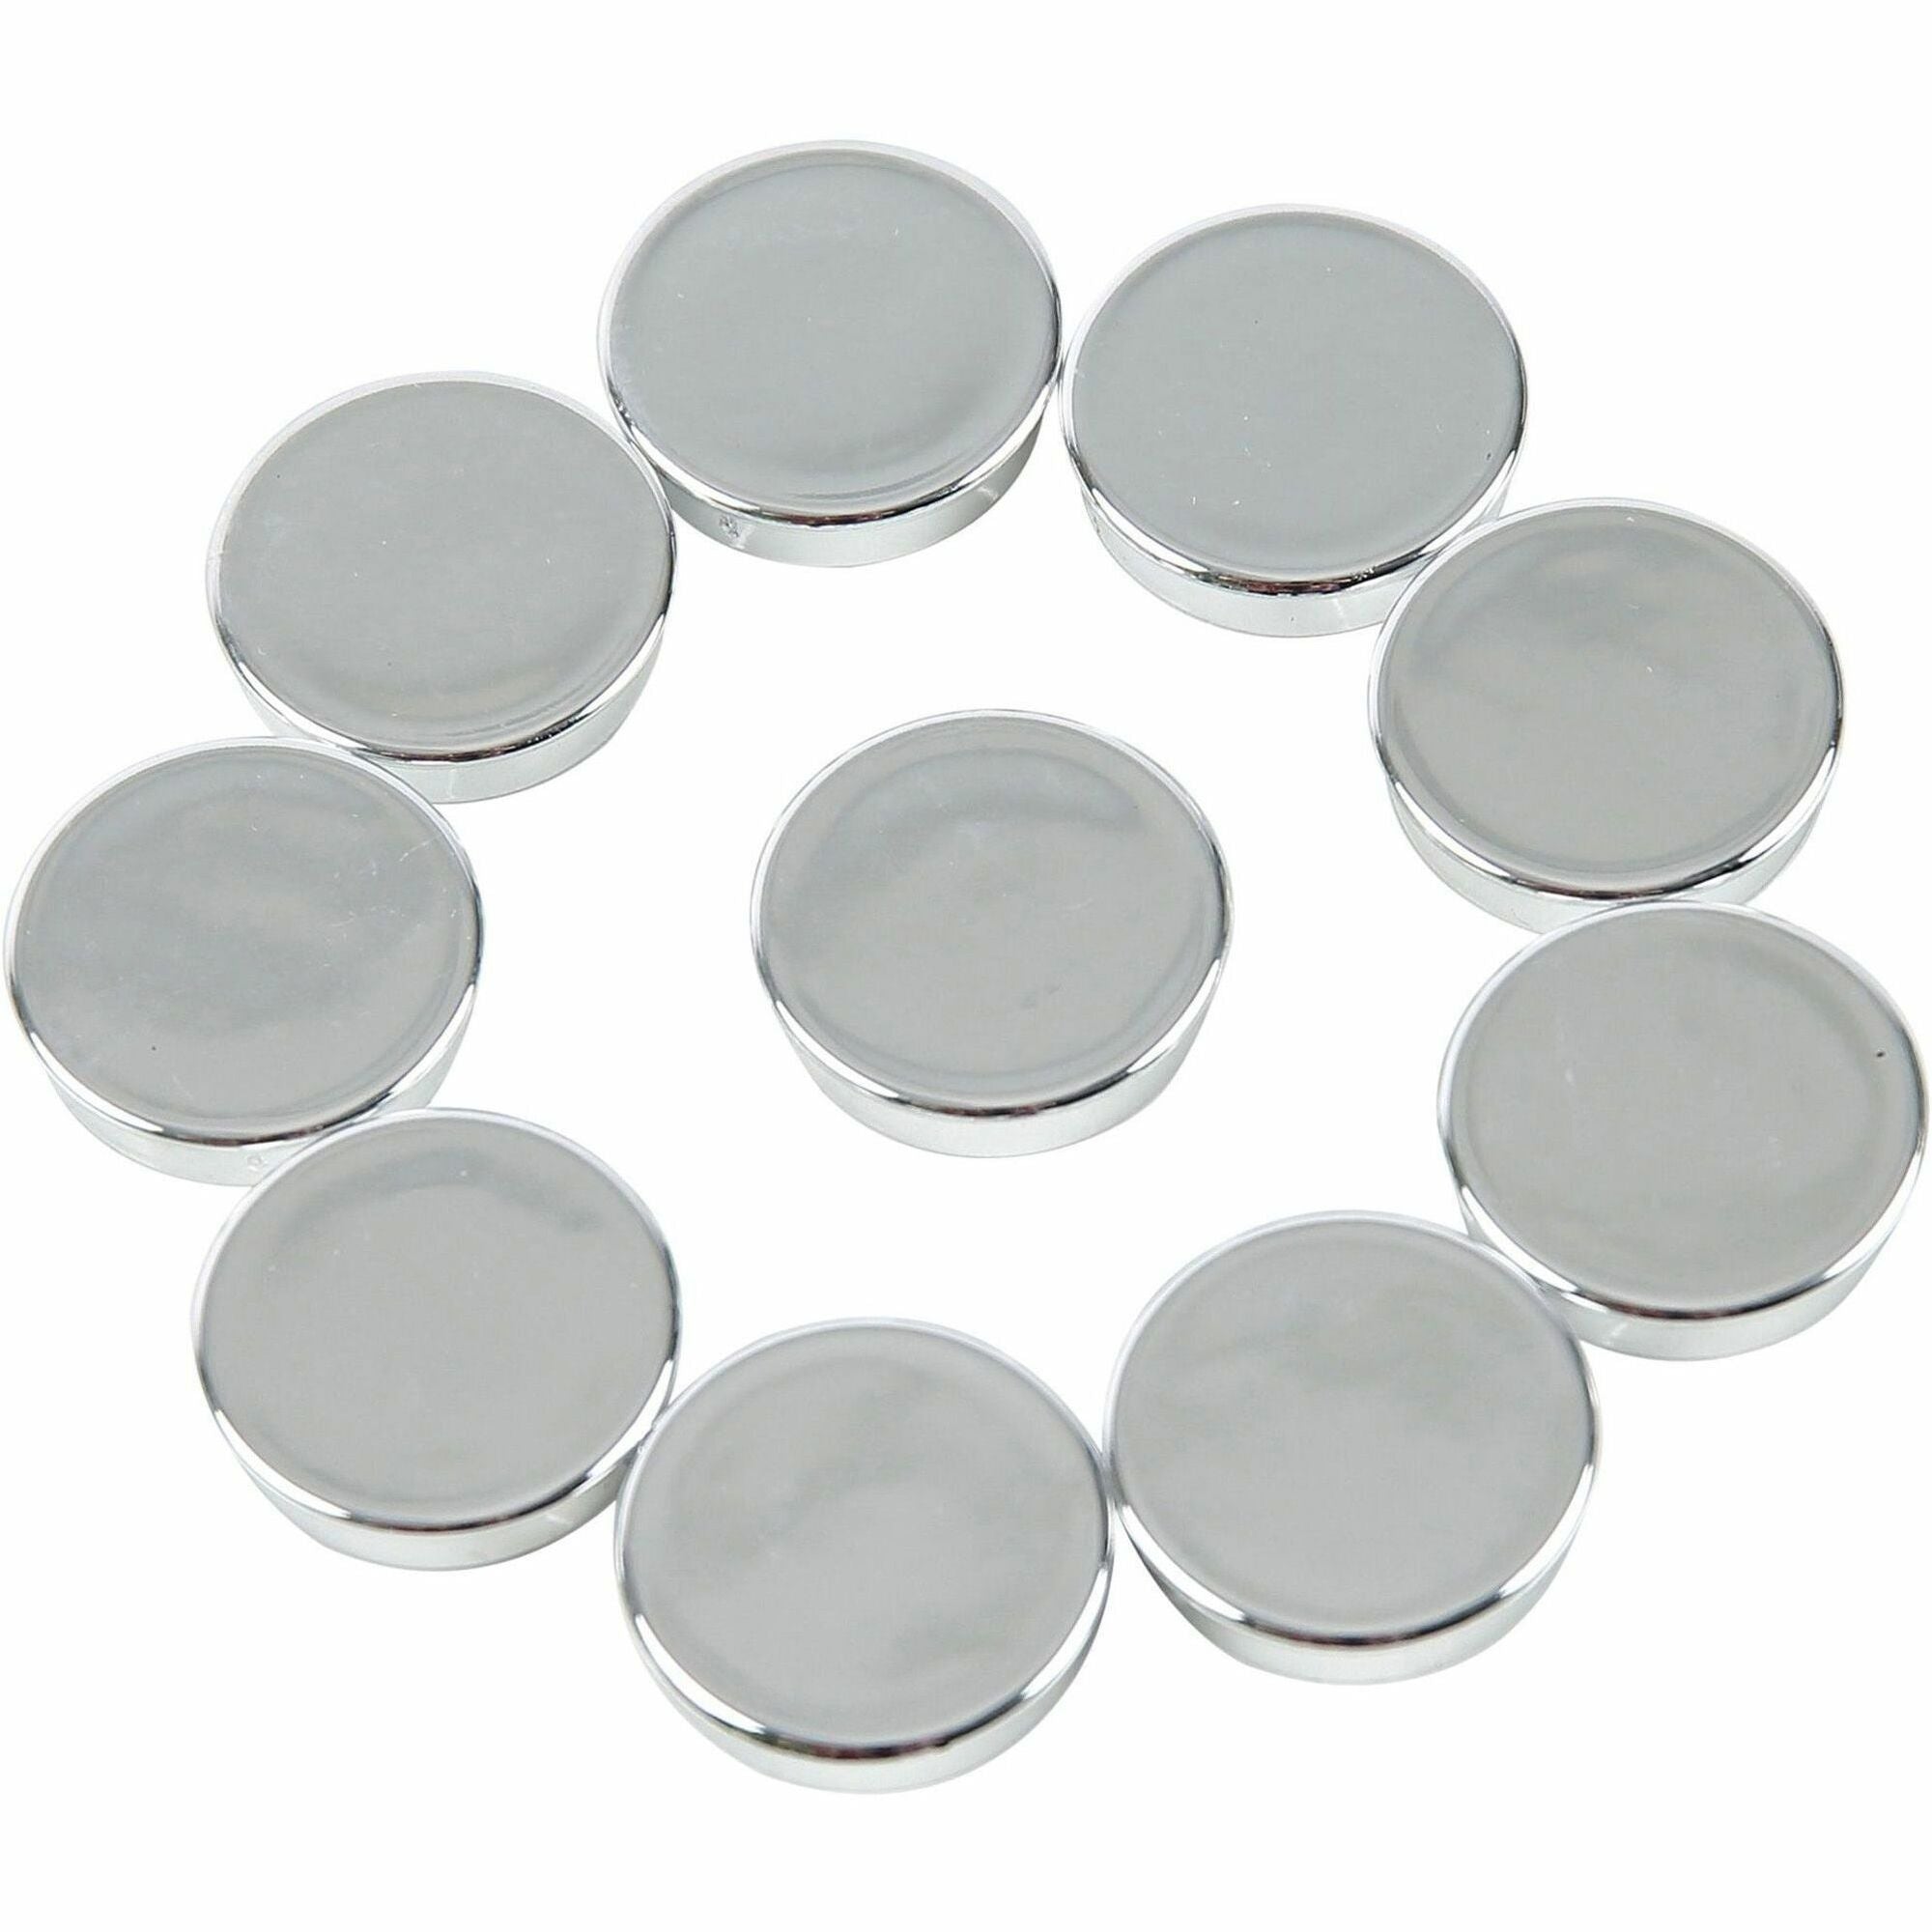 mastervision-planning-board-magnets-1-diameter-round-10-pack-silver_bvcim130809 - 1